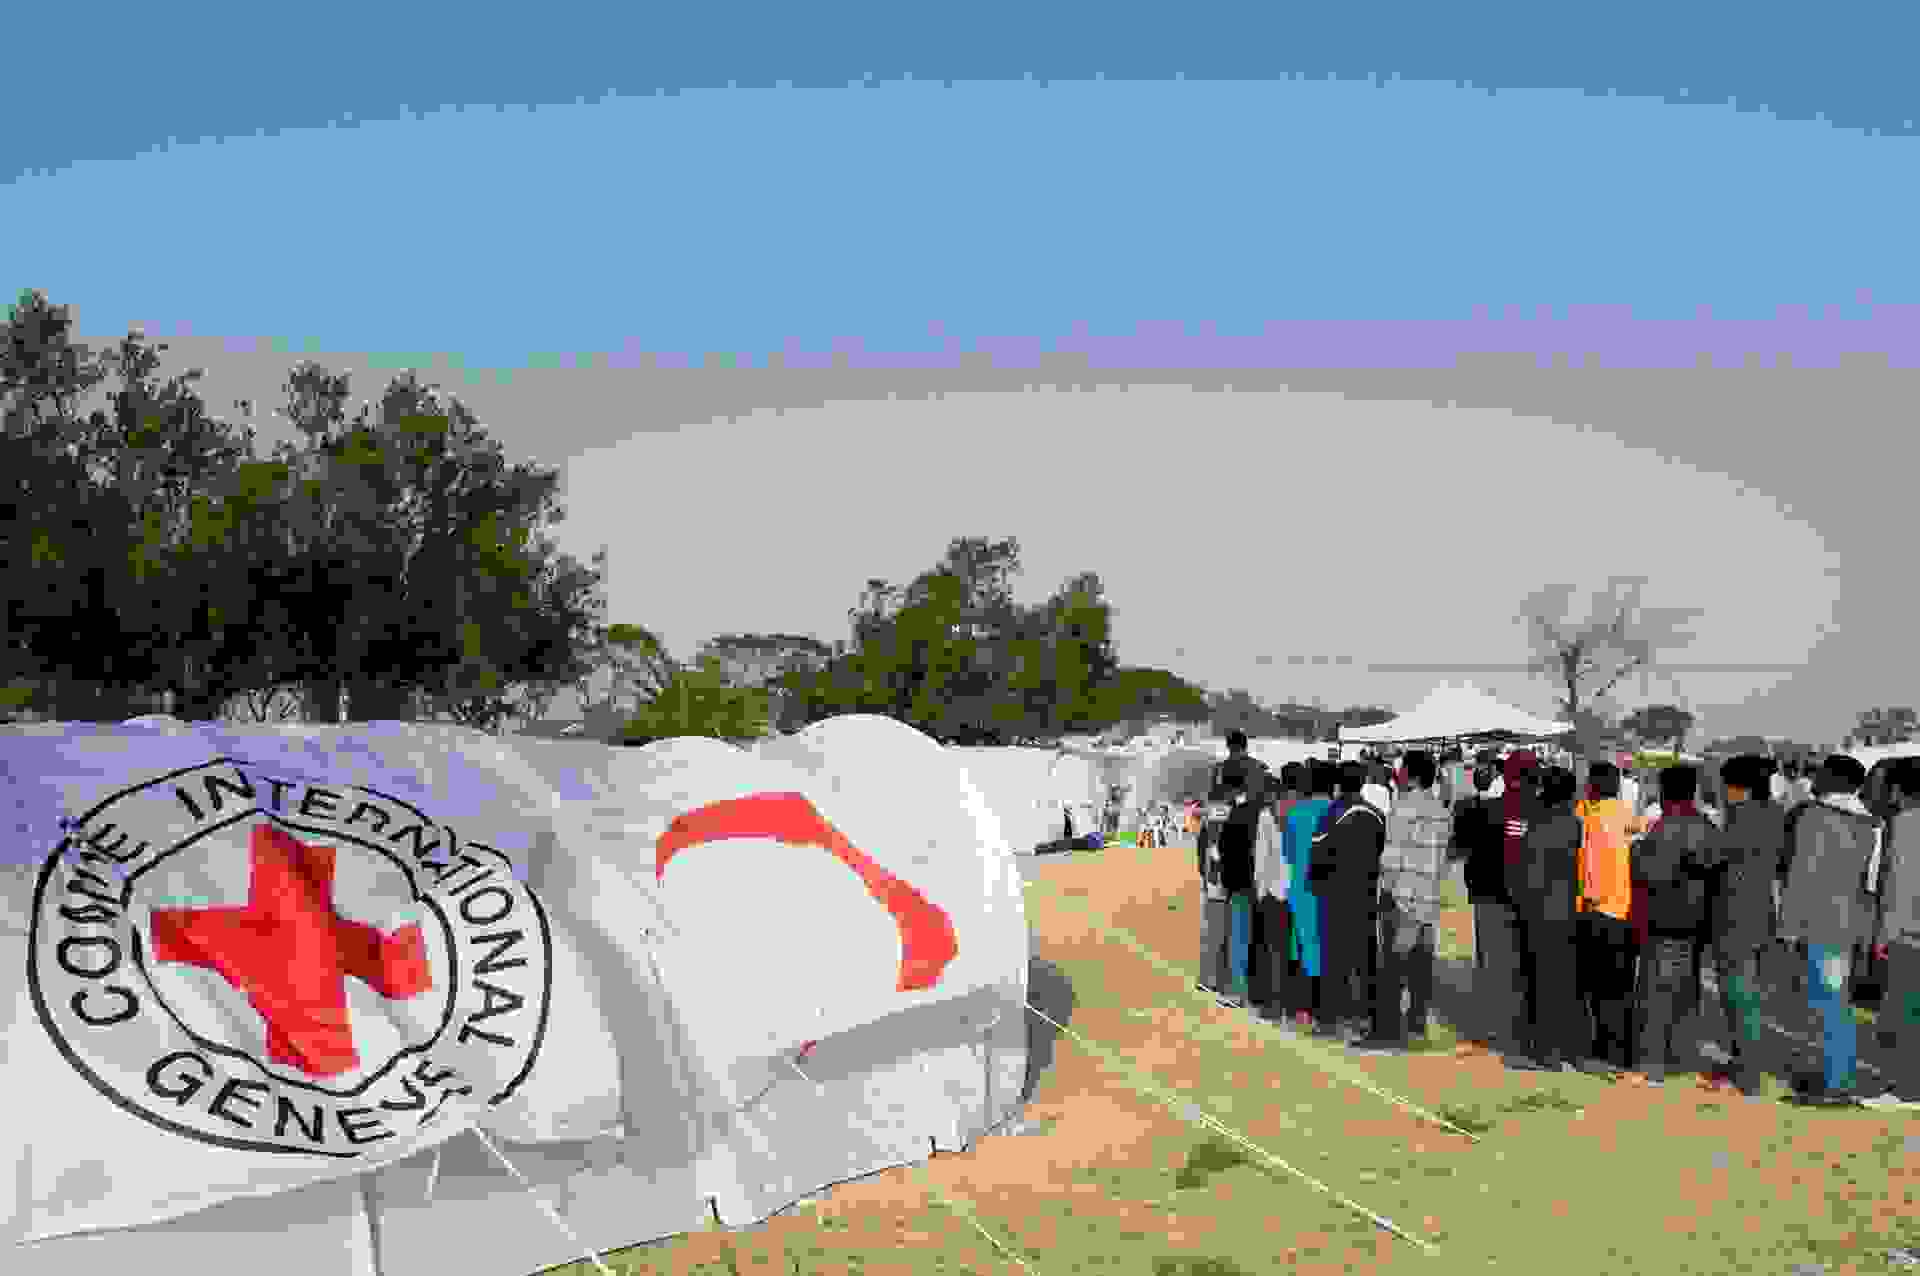 People queueing at a refugee camp among tents equipped with the Red Cross symbols.